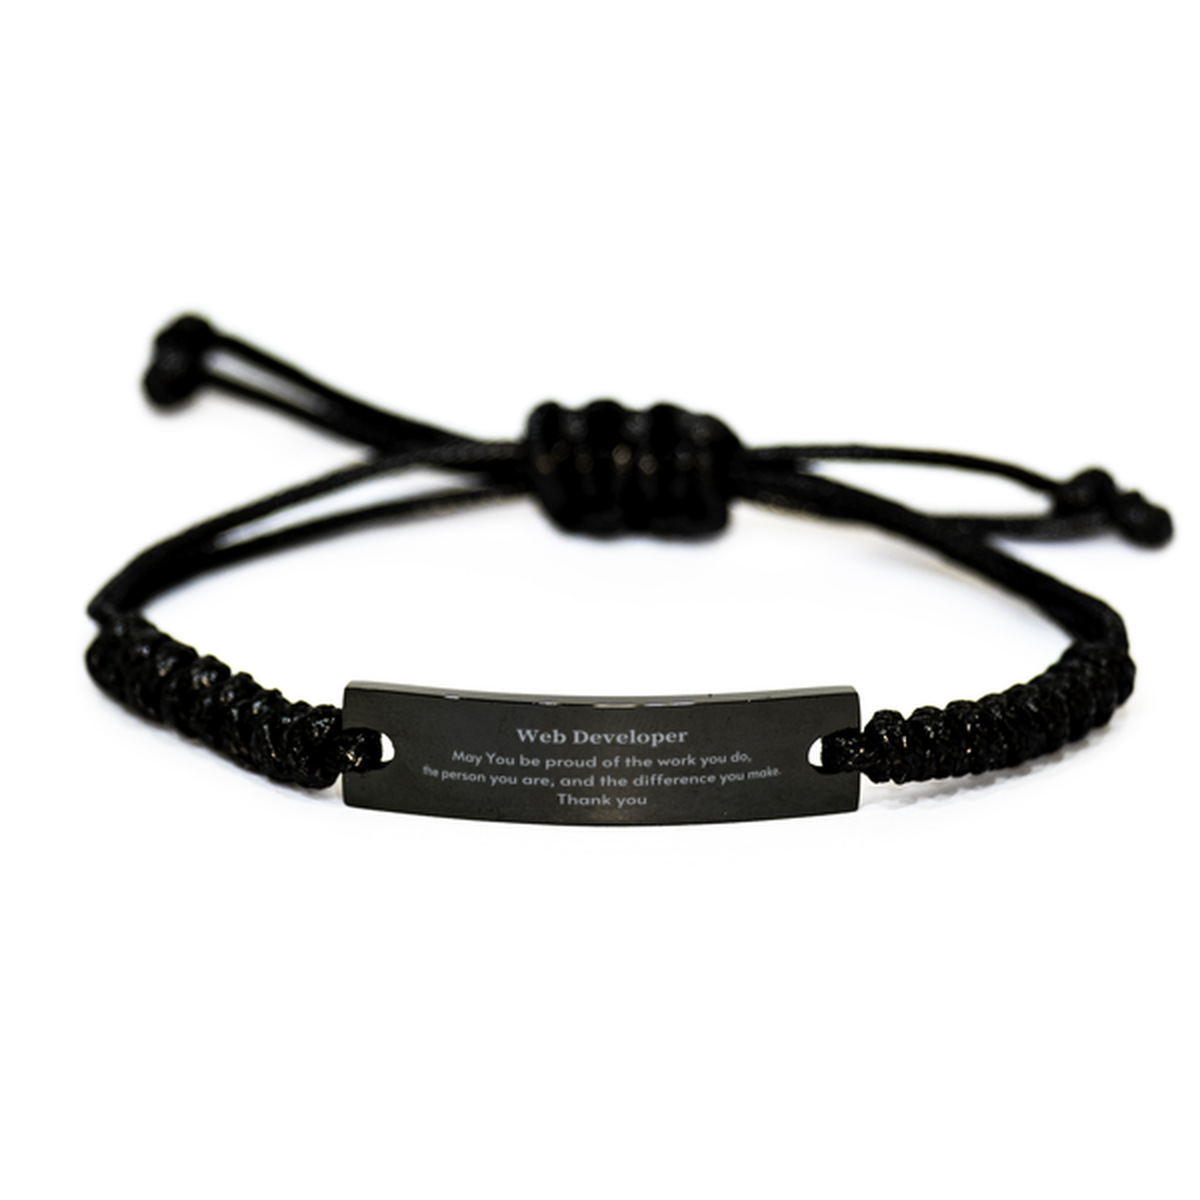 Heartwarming Black Rope Bracelet Retirement Coworkers Gifts for Web Developer, Web Developer May You be proud of the work you do, the person you are Gifts for Boss Men Women Friends